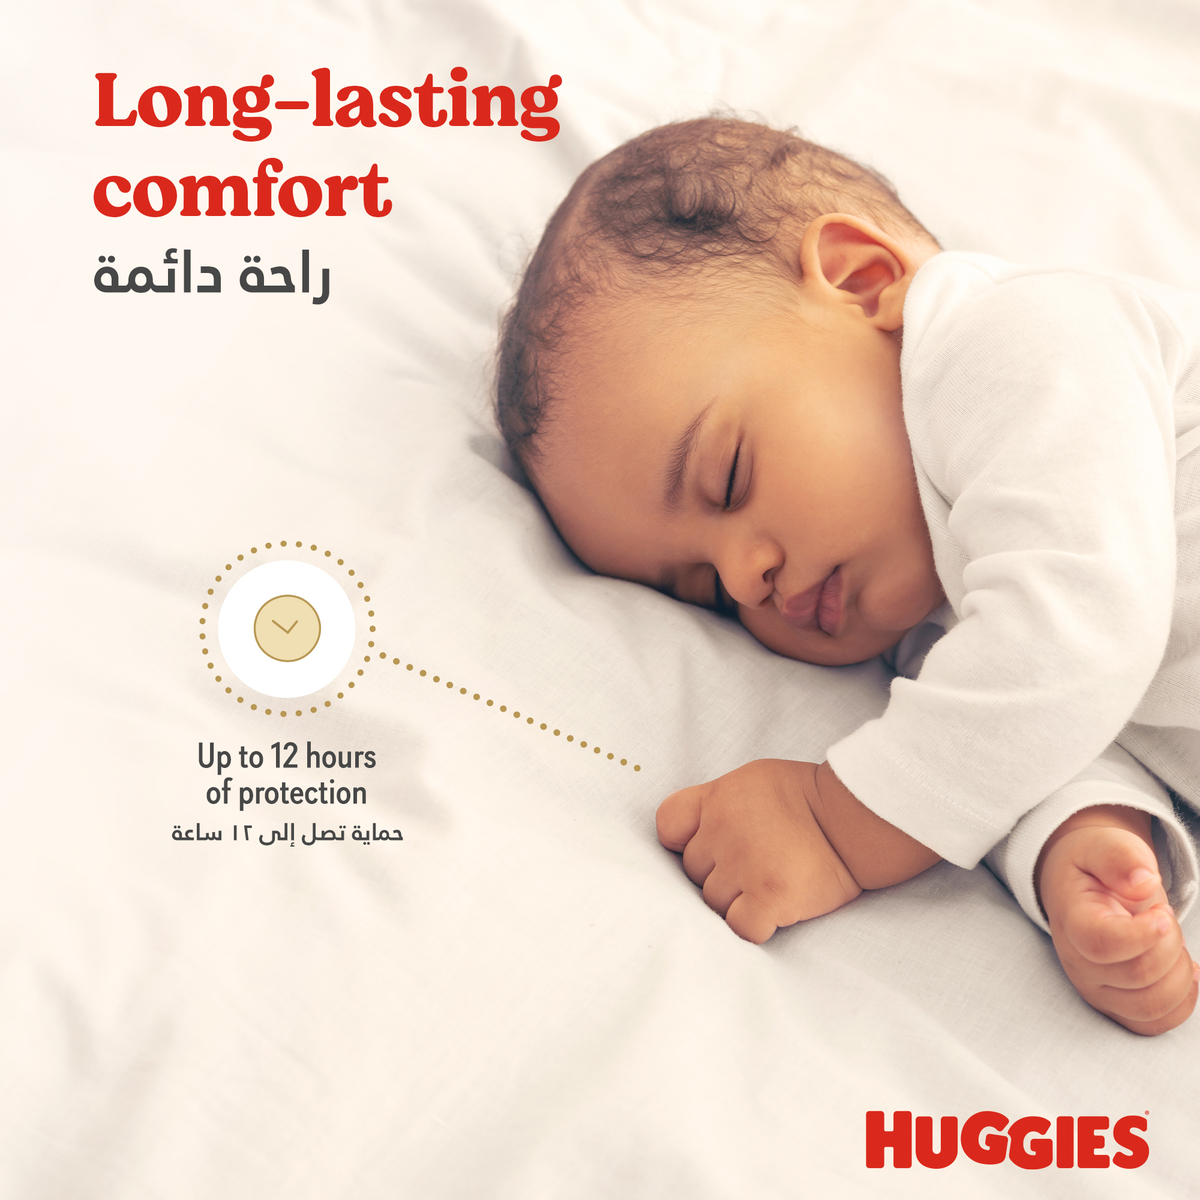 Huggies Extra Care Size 6 15+ kg Value Pack 28 pcs